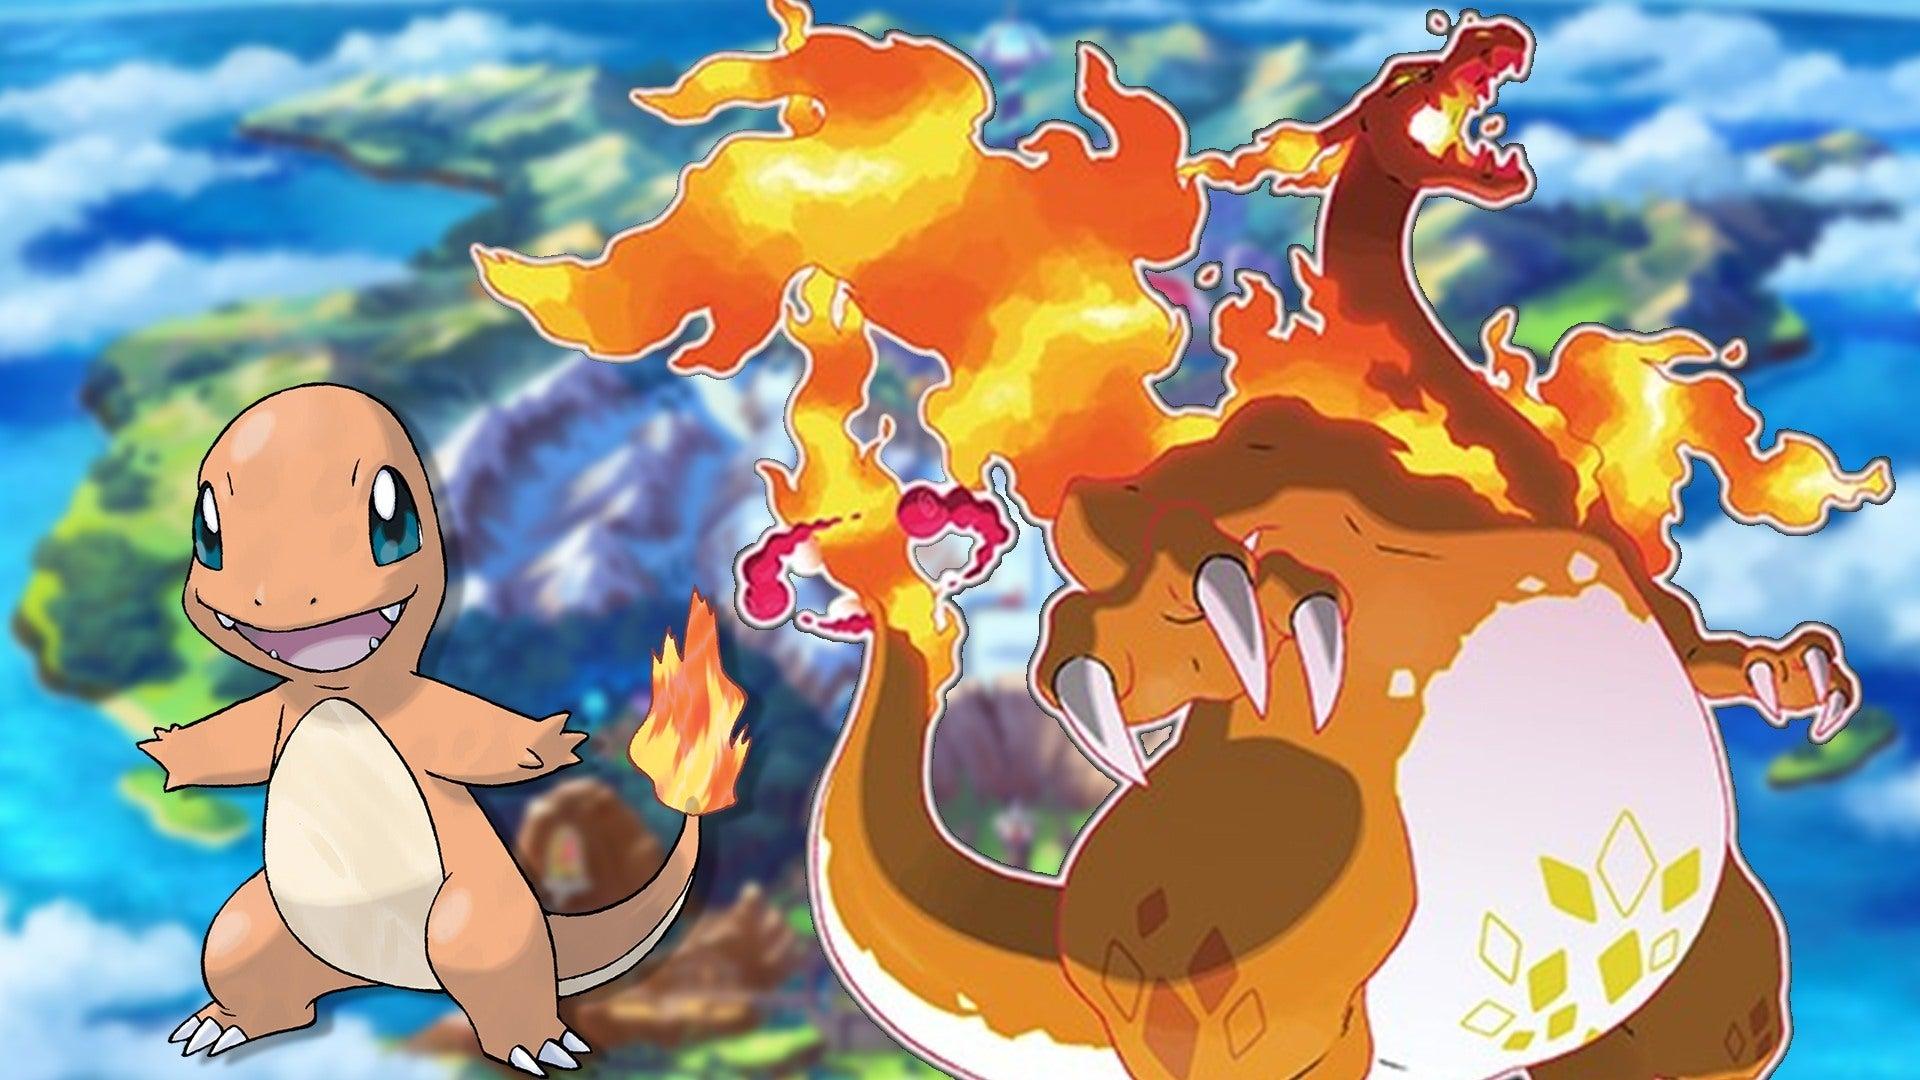 How to Get a Gigantamax Charizard in Pokemon Sword and Shield